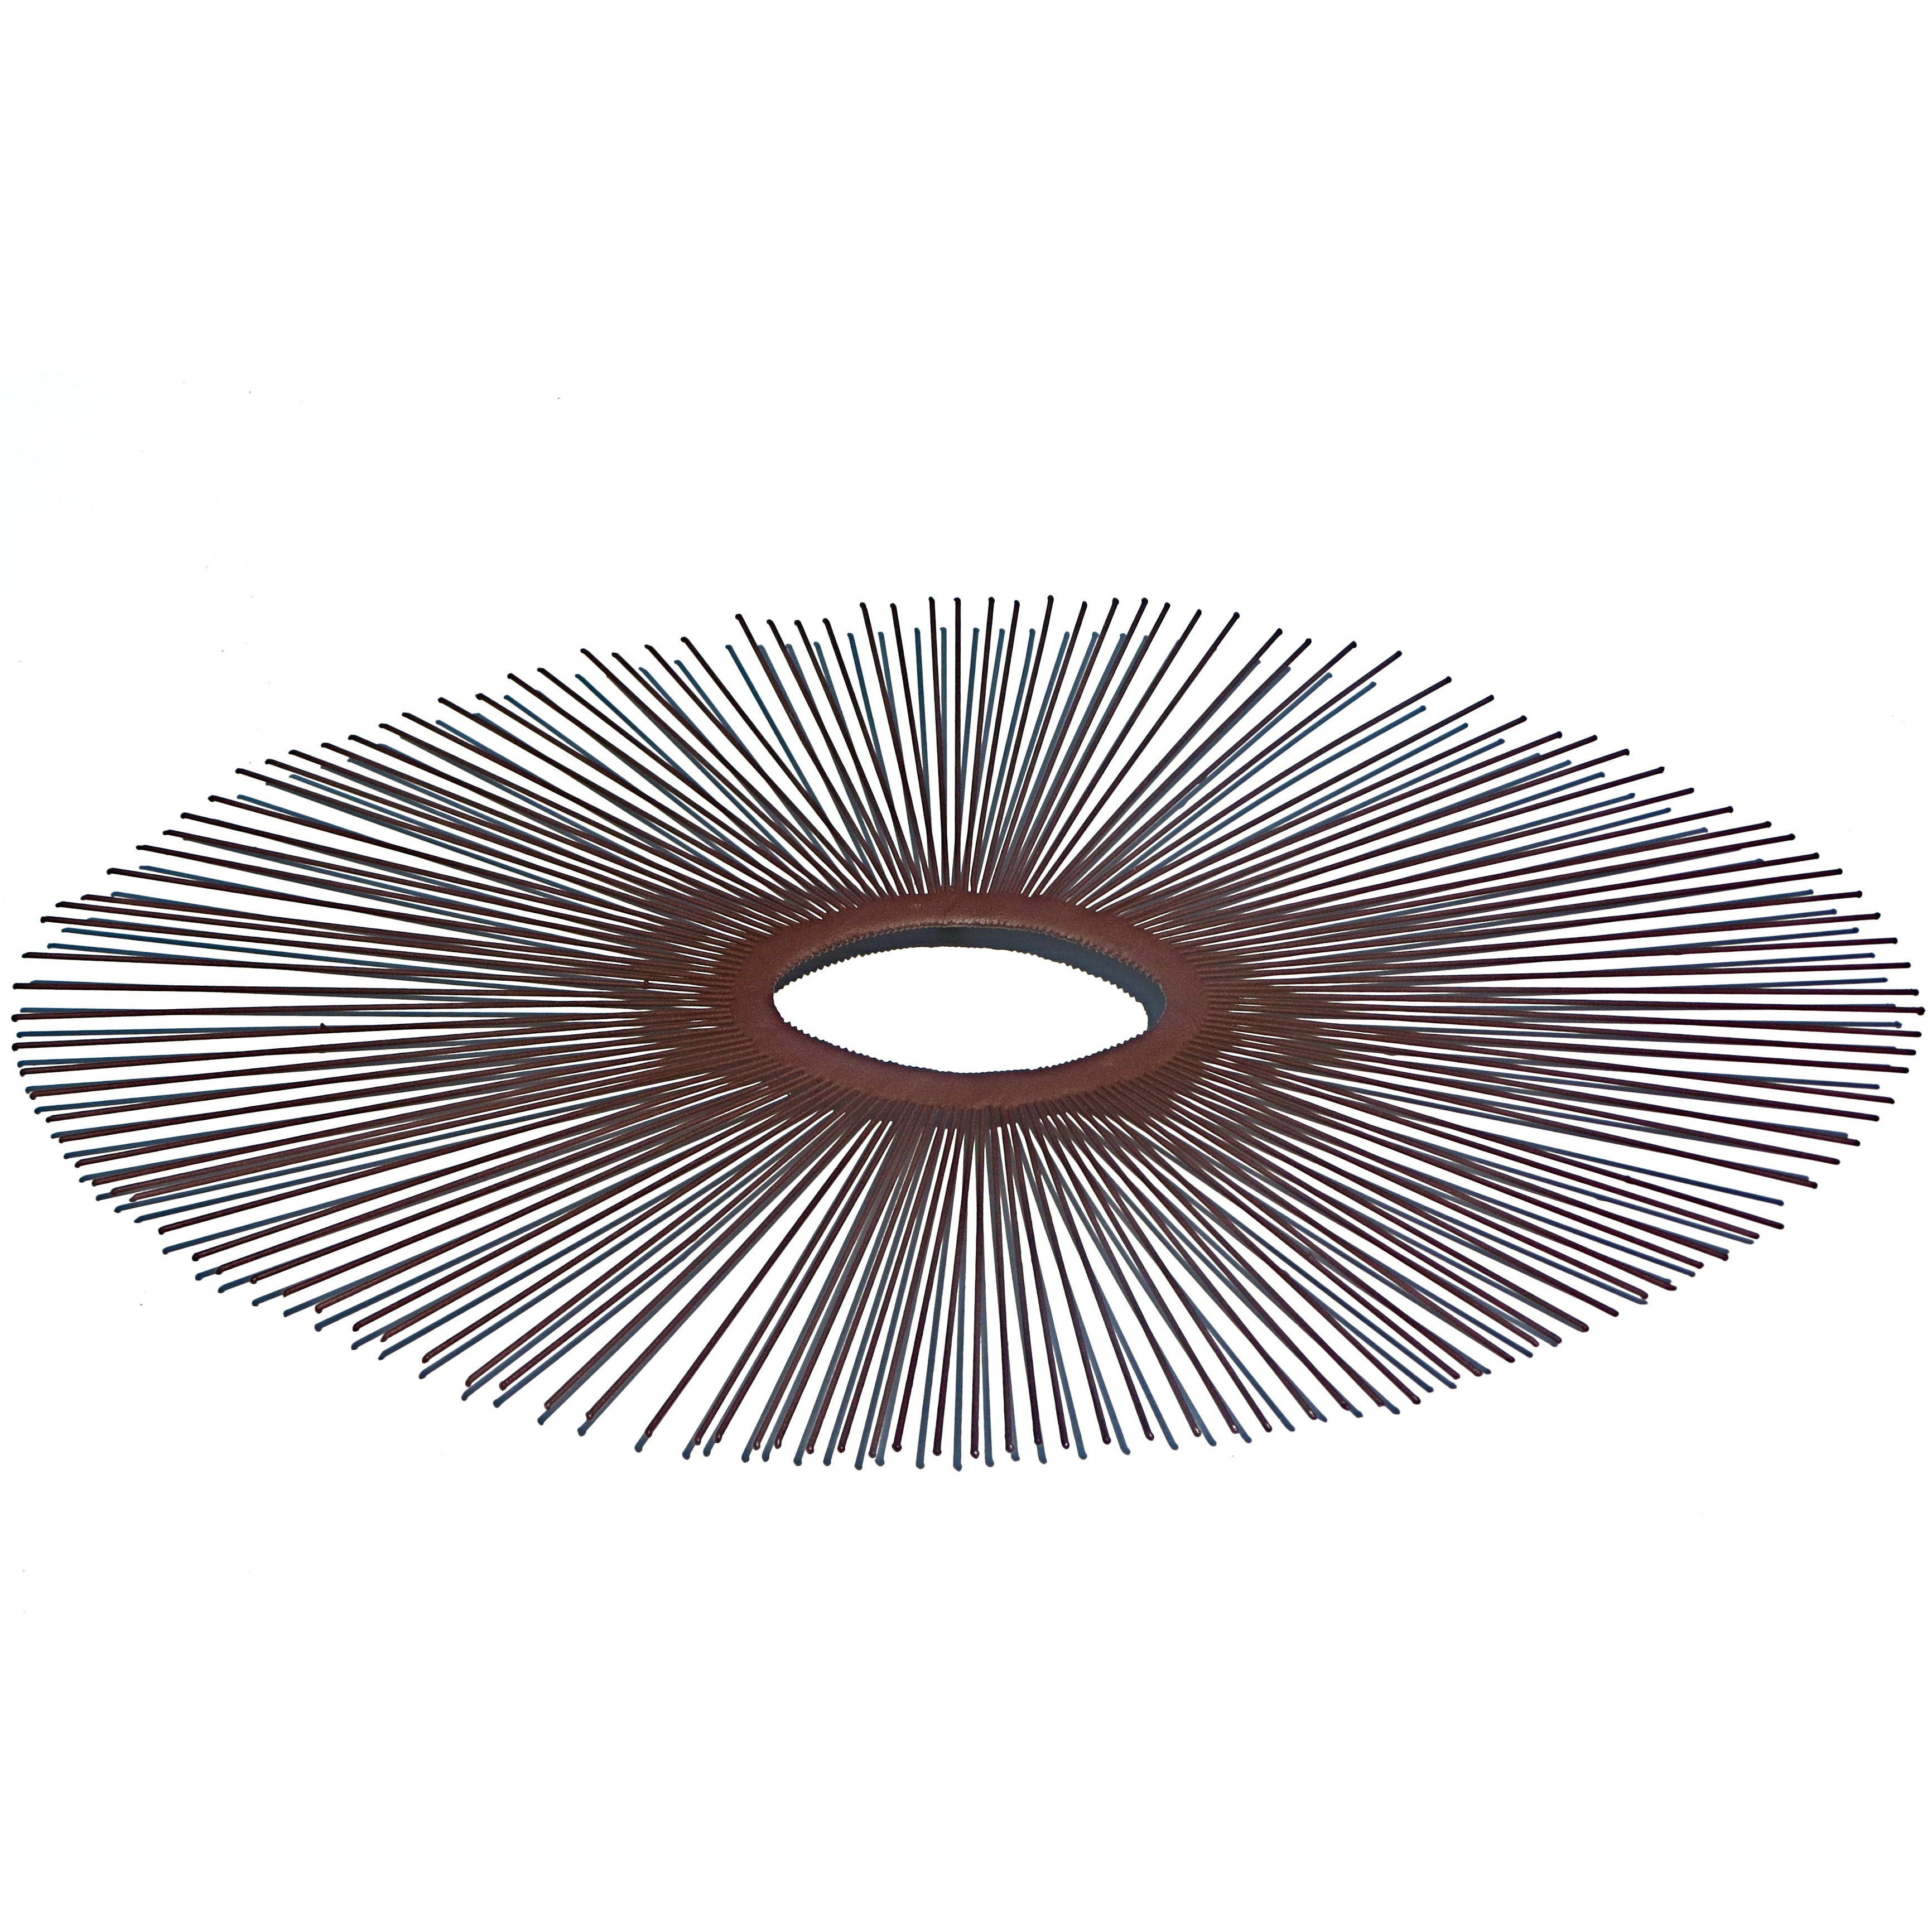 1970s Sunburst Wall Relief Metal Sculpture by Curtis Jere